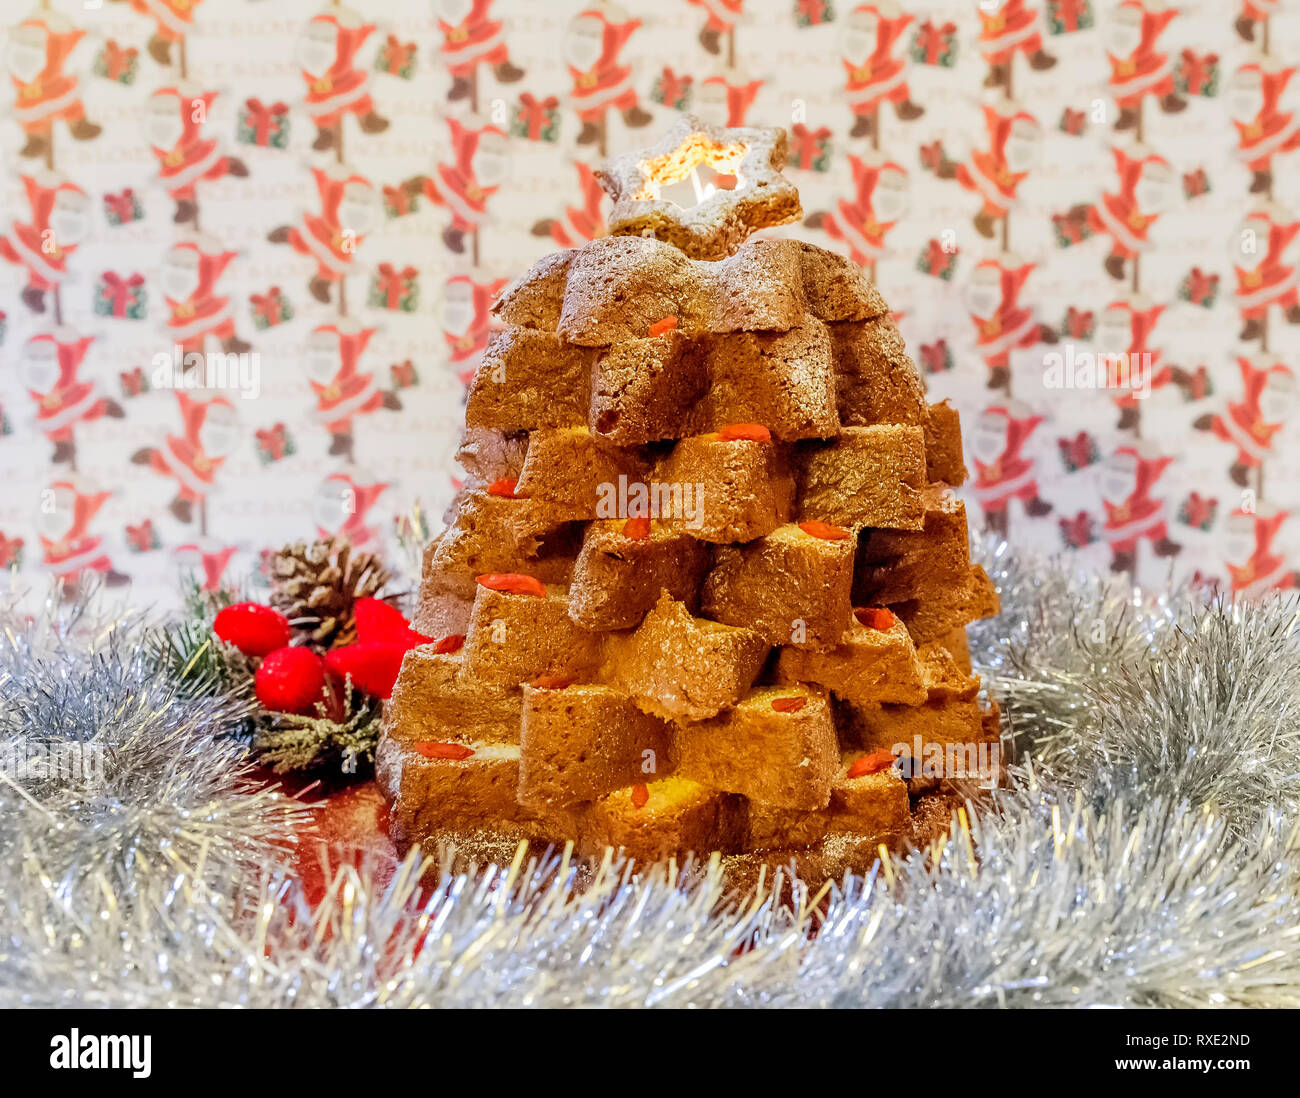 Christmas composition with Pandoro, a typical Italian dessert, cut in a star shape and decorations with Goji berries Stock Photo